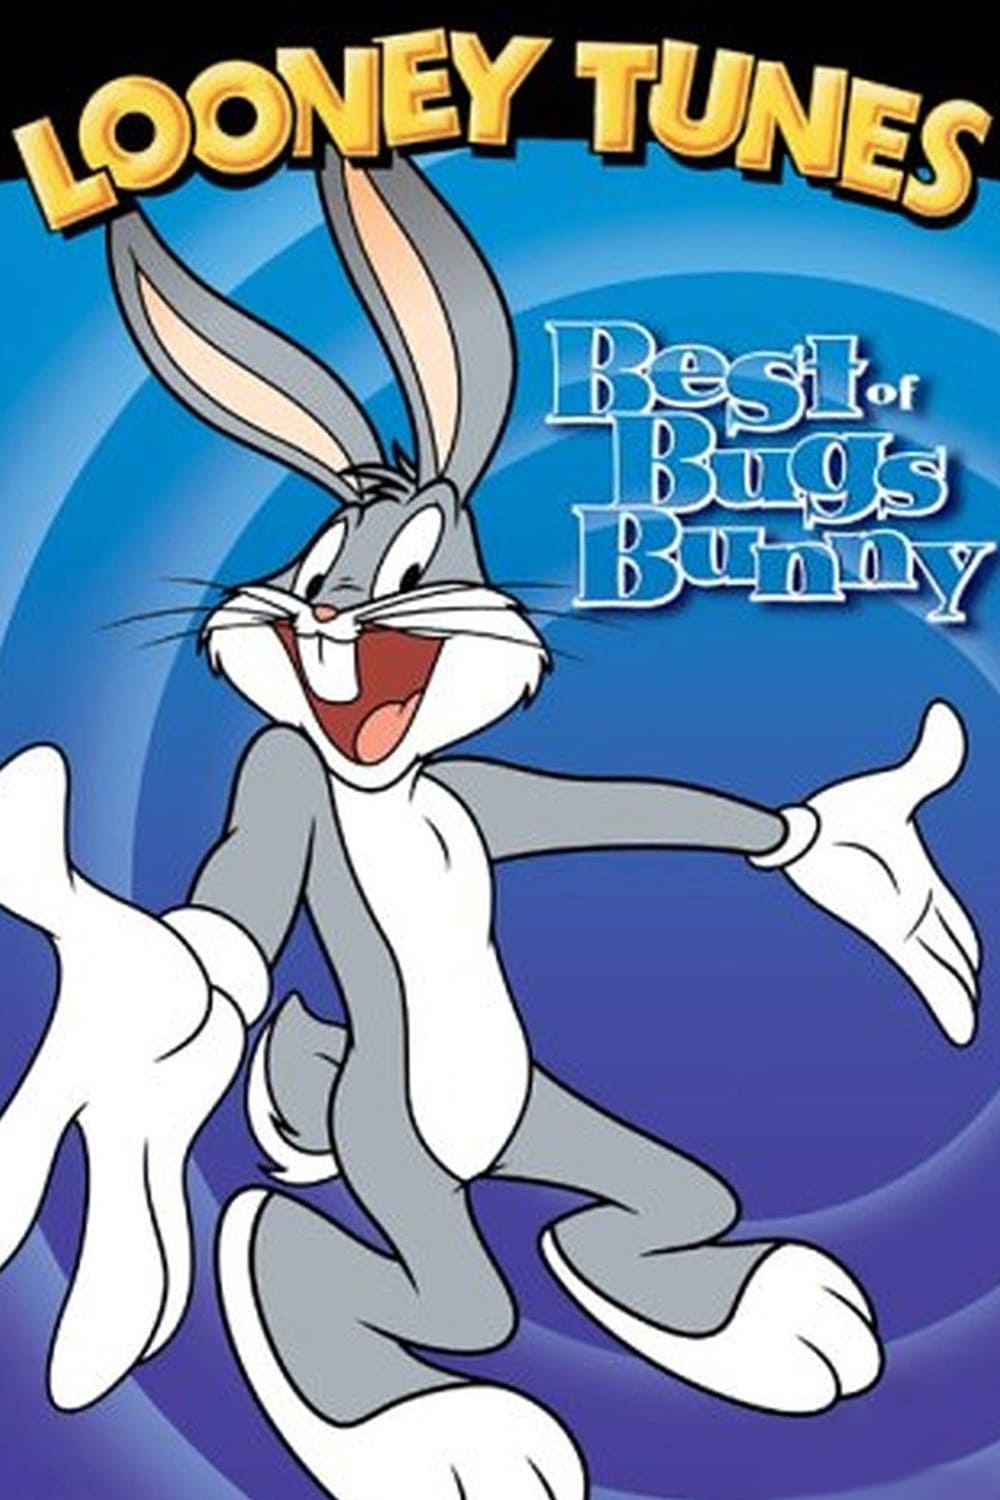 Looney Tunes Collection: Best Of Bugs Bunny Volume 1 (2004)